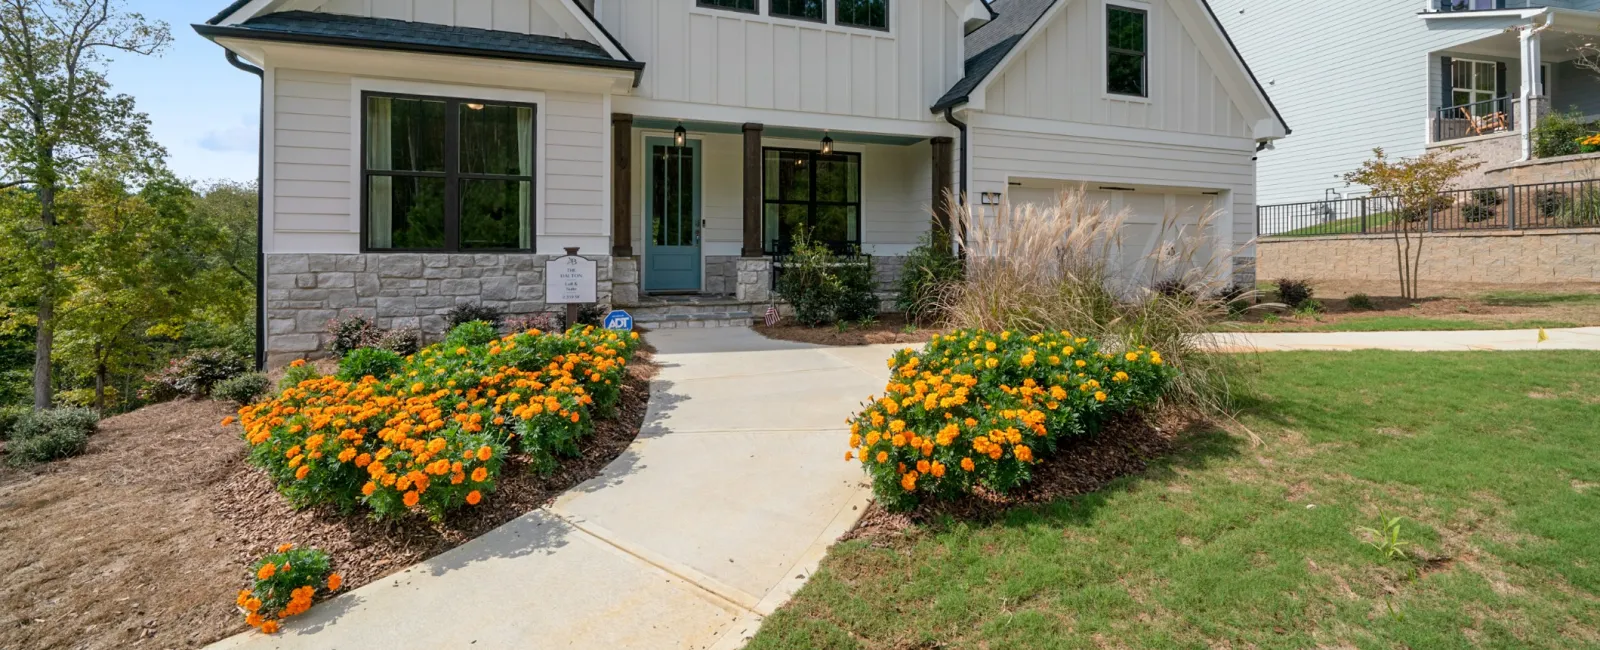 Landscaping Tips for the Best Summer Yard